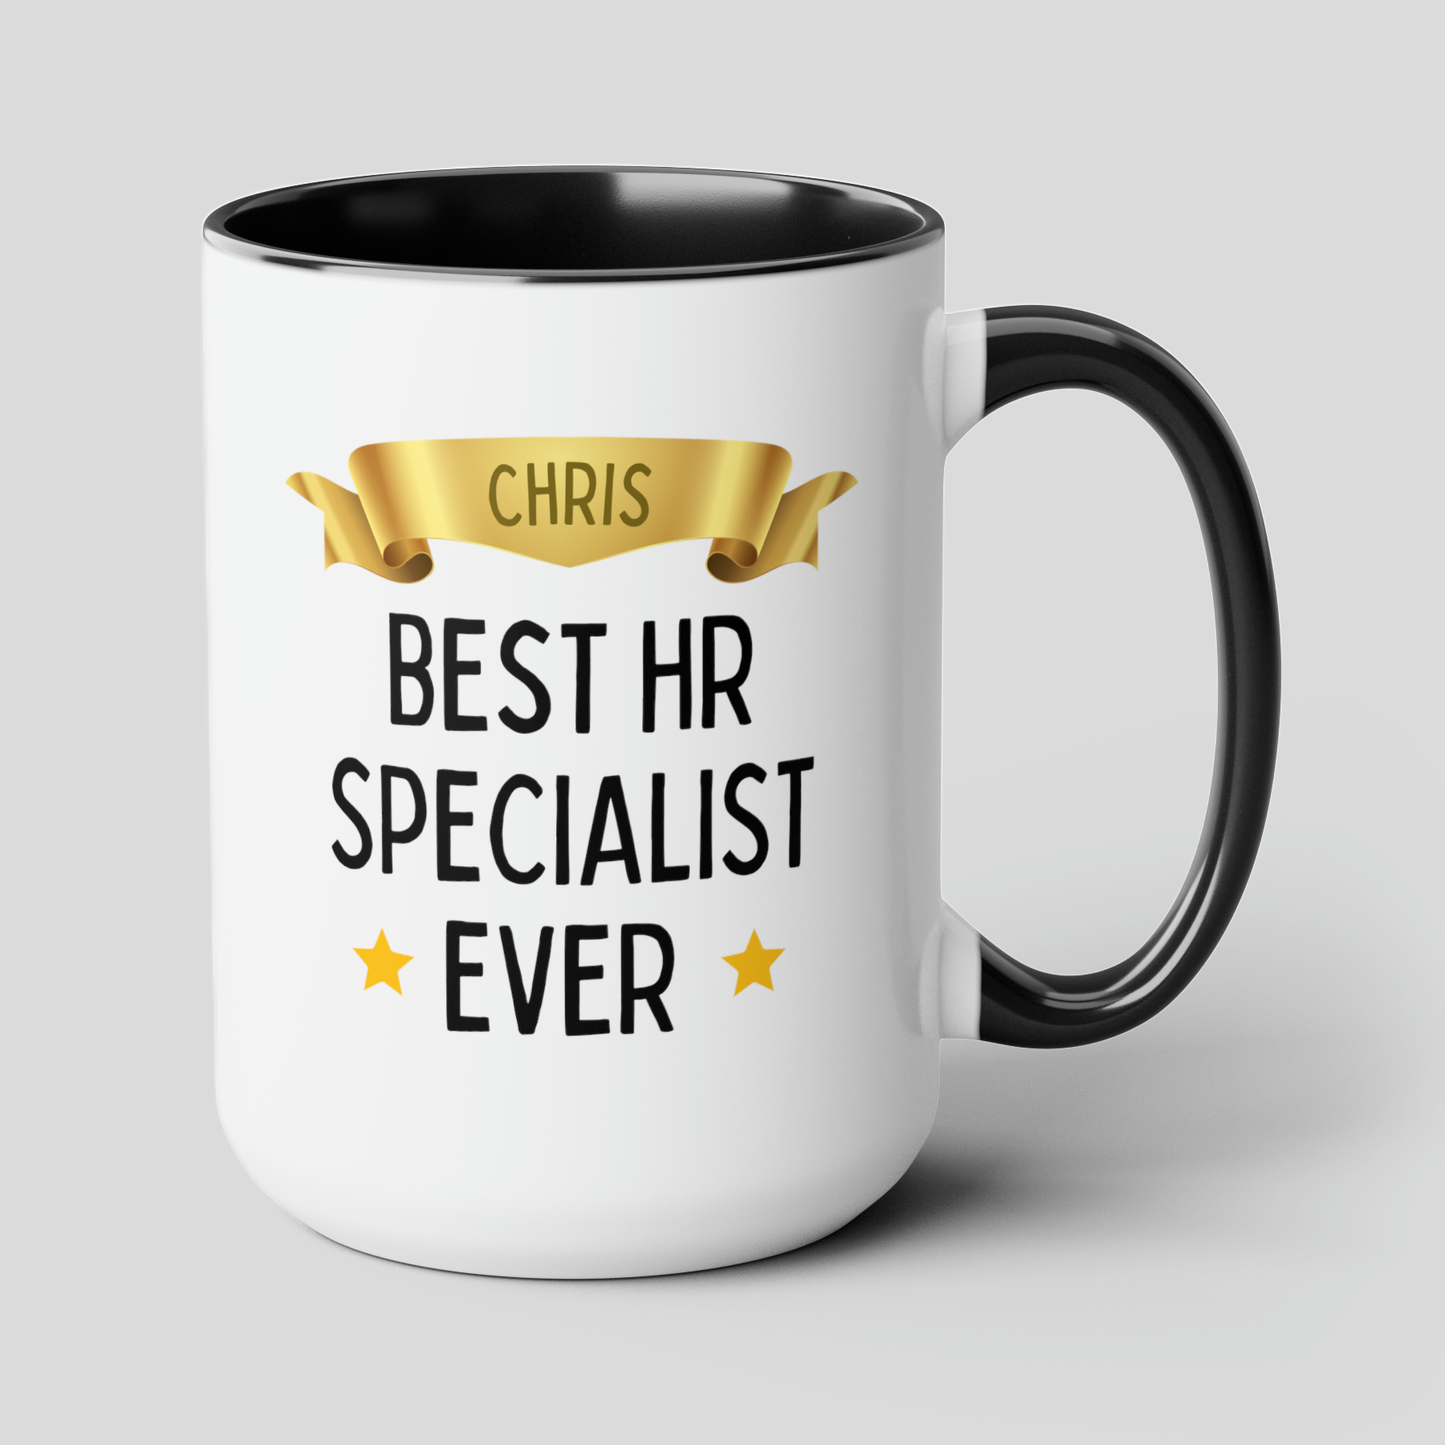 Best HR Specialist Ever 15oz white with black accent funny large coffee mug gift for human resources manager officer custom name personalize waveywares wavey wares wavywares wavy wares cover